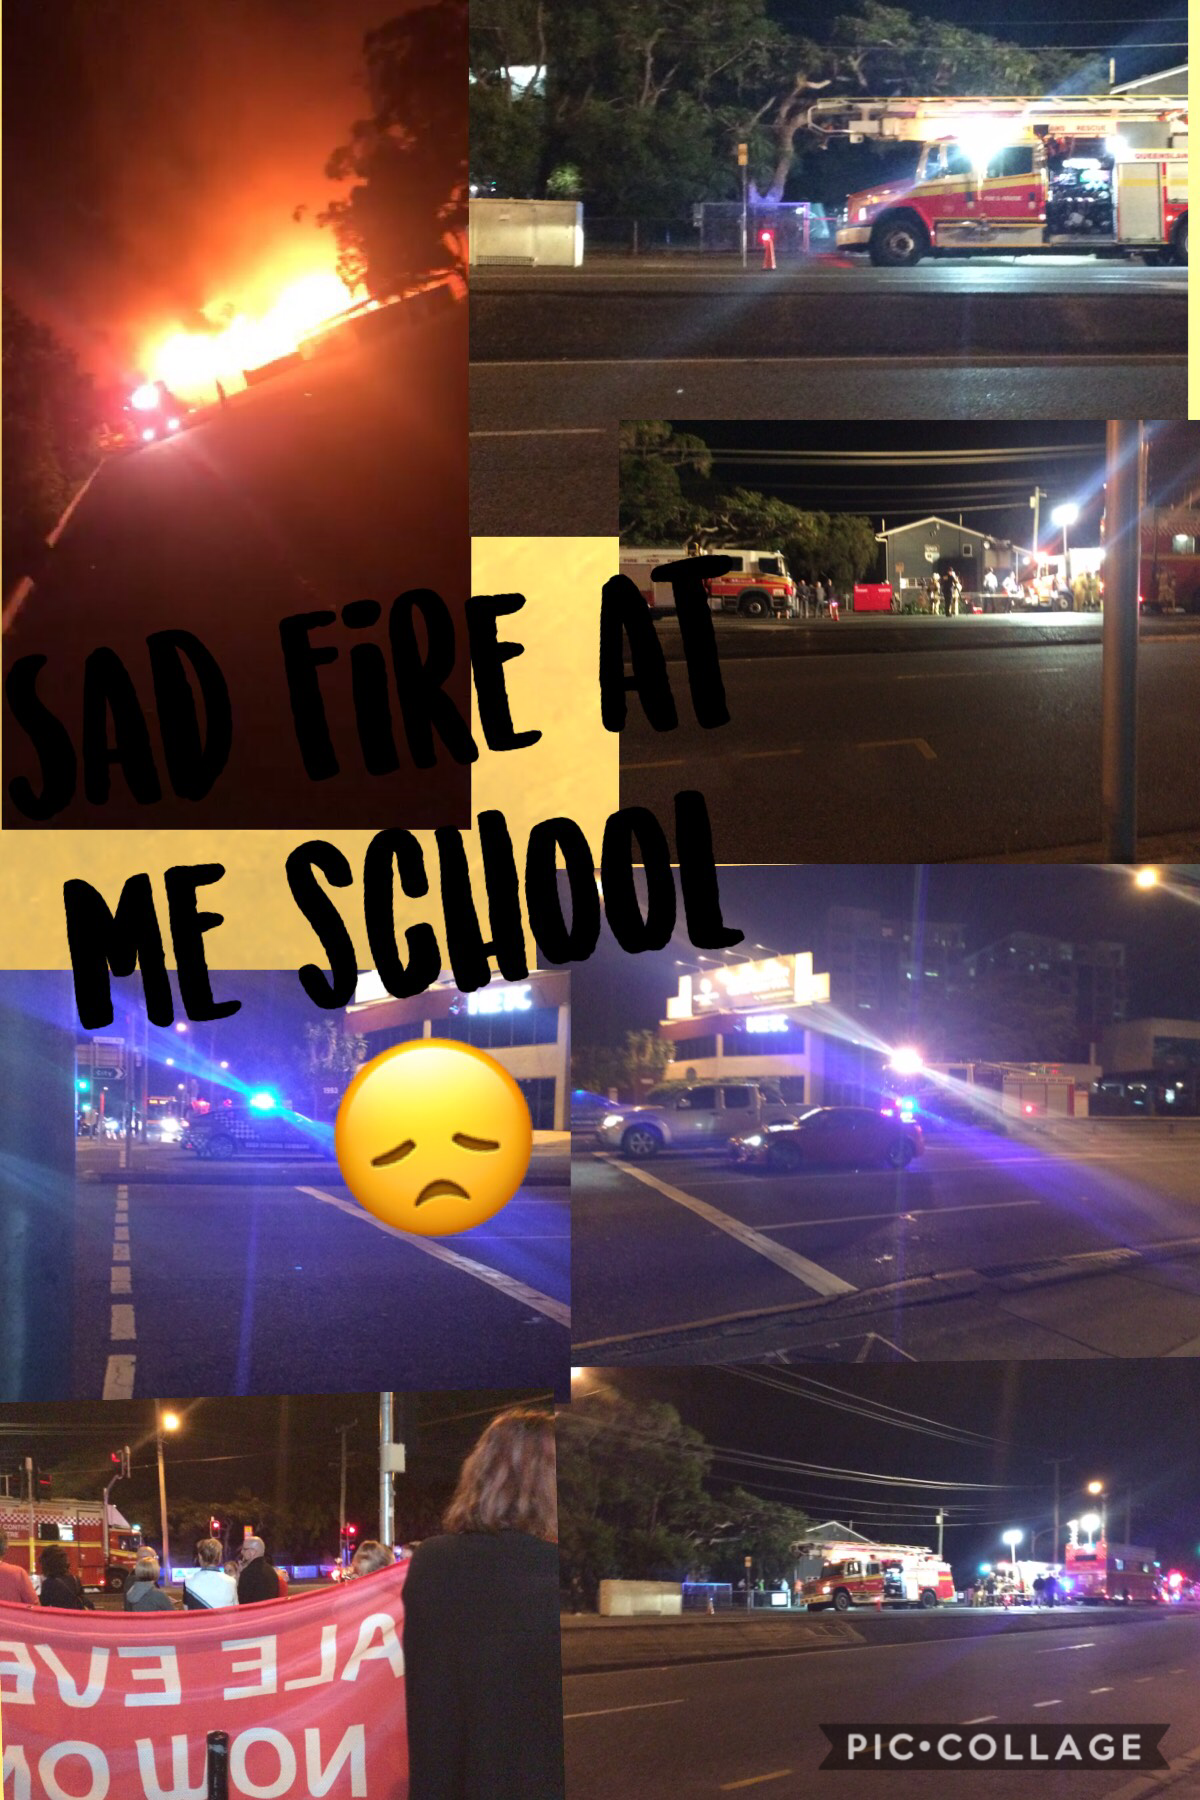 Sad 😞 my school was burning on the 9th June at 7:10pm 2019